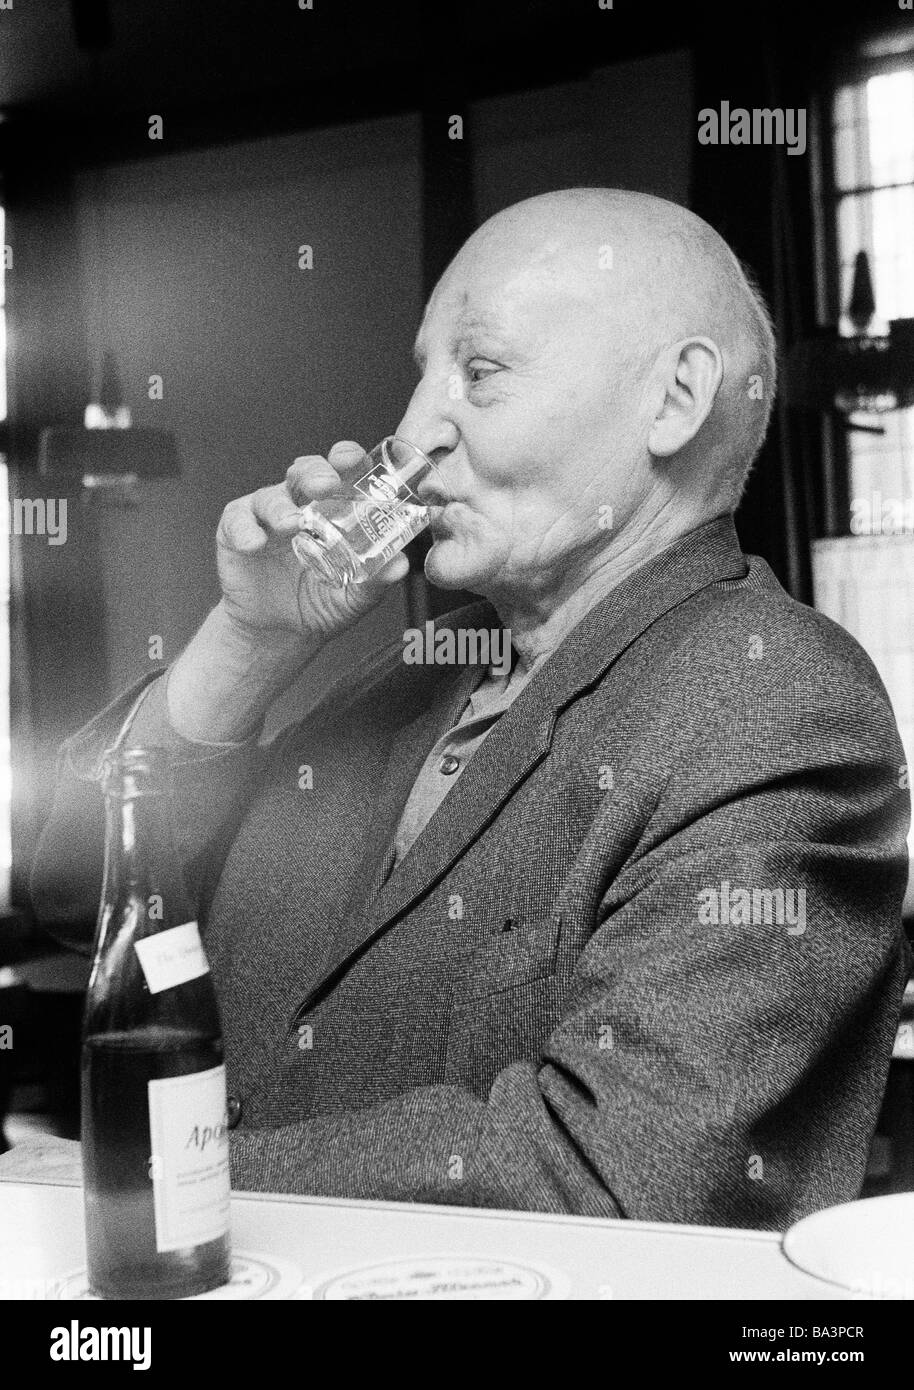 Seventies, black and white photo, people, older man sits at the table drinking a glass of mineral water, aged 70 to 80 years Stock Photo